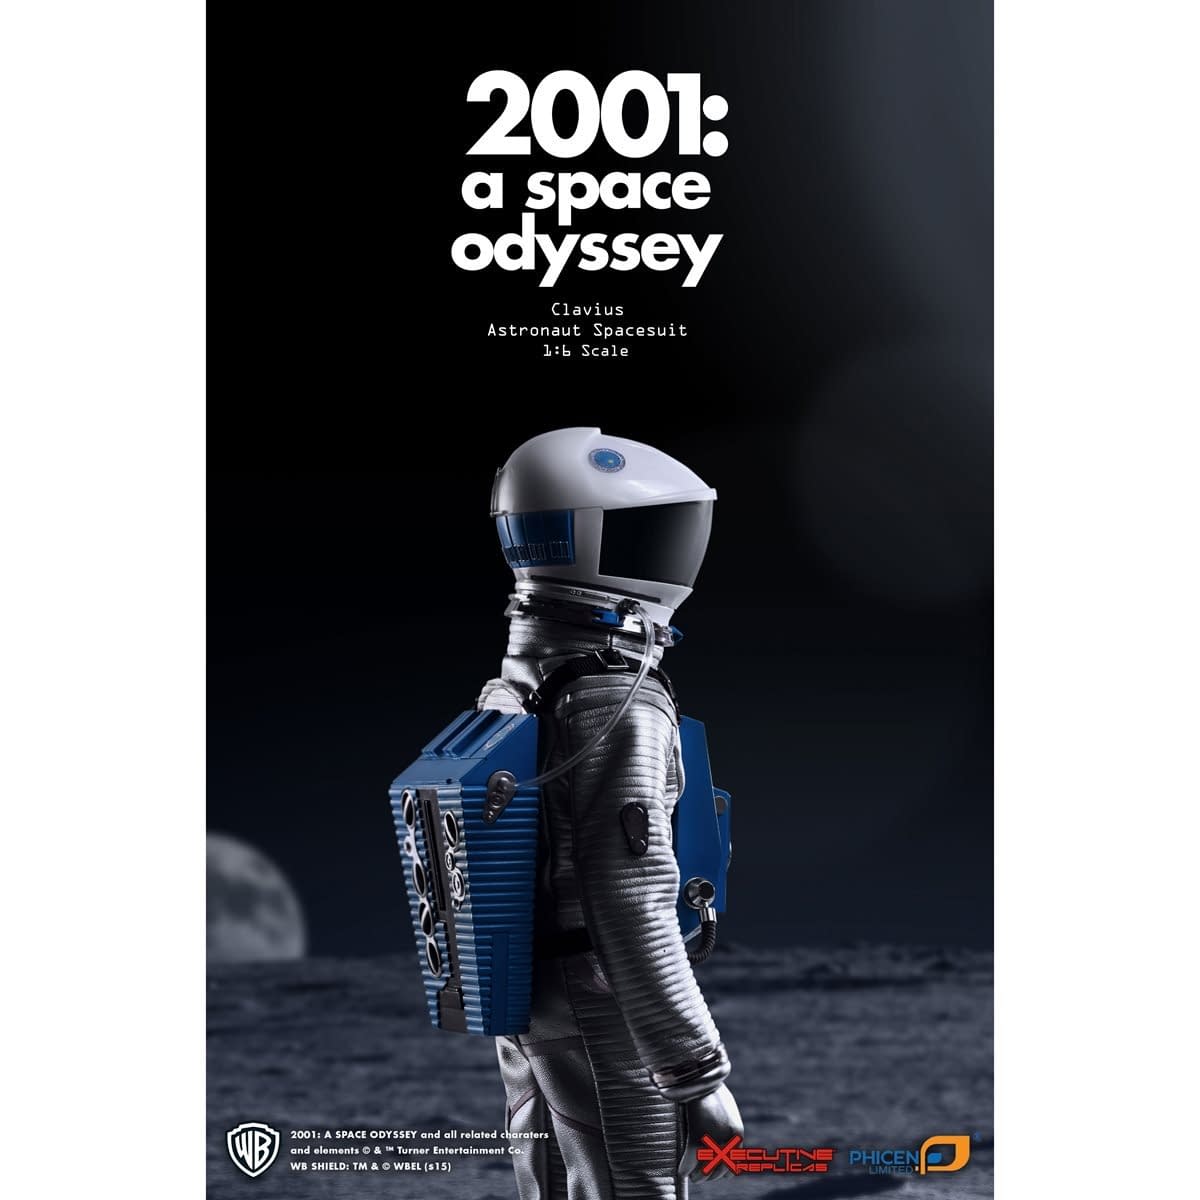 "2001: A Space Odyssey" Receives a High-End Collectible Figure Suit 